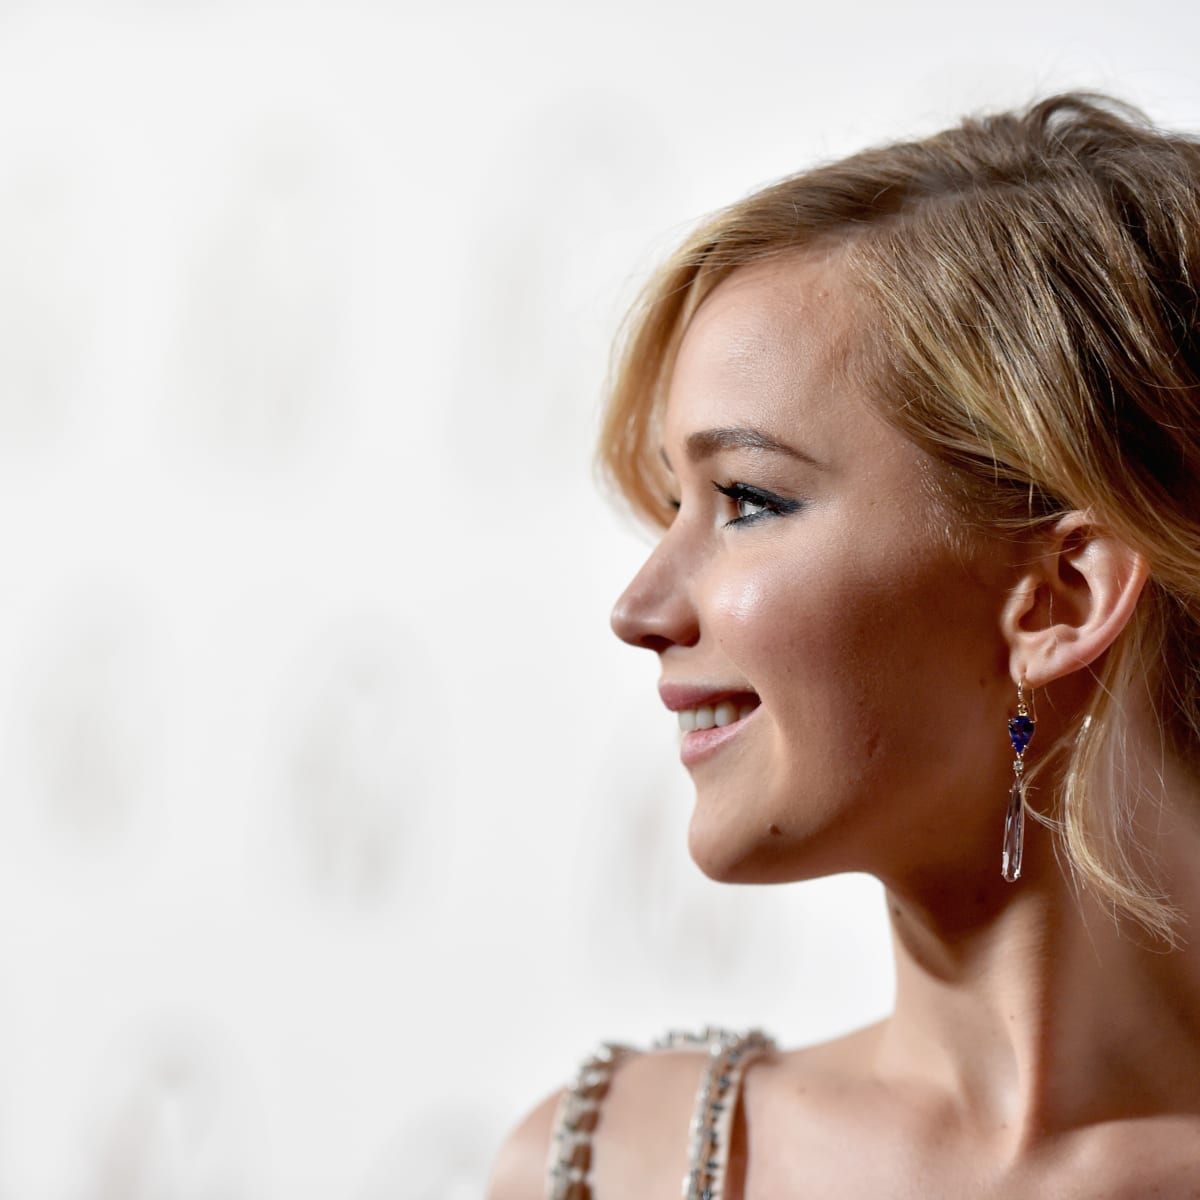 Jennifer Lawrence Getting Fucked - Jennifer Lawrence Tells Vogue What She Really Wants in Love - Verily